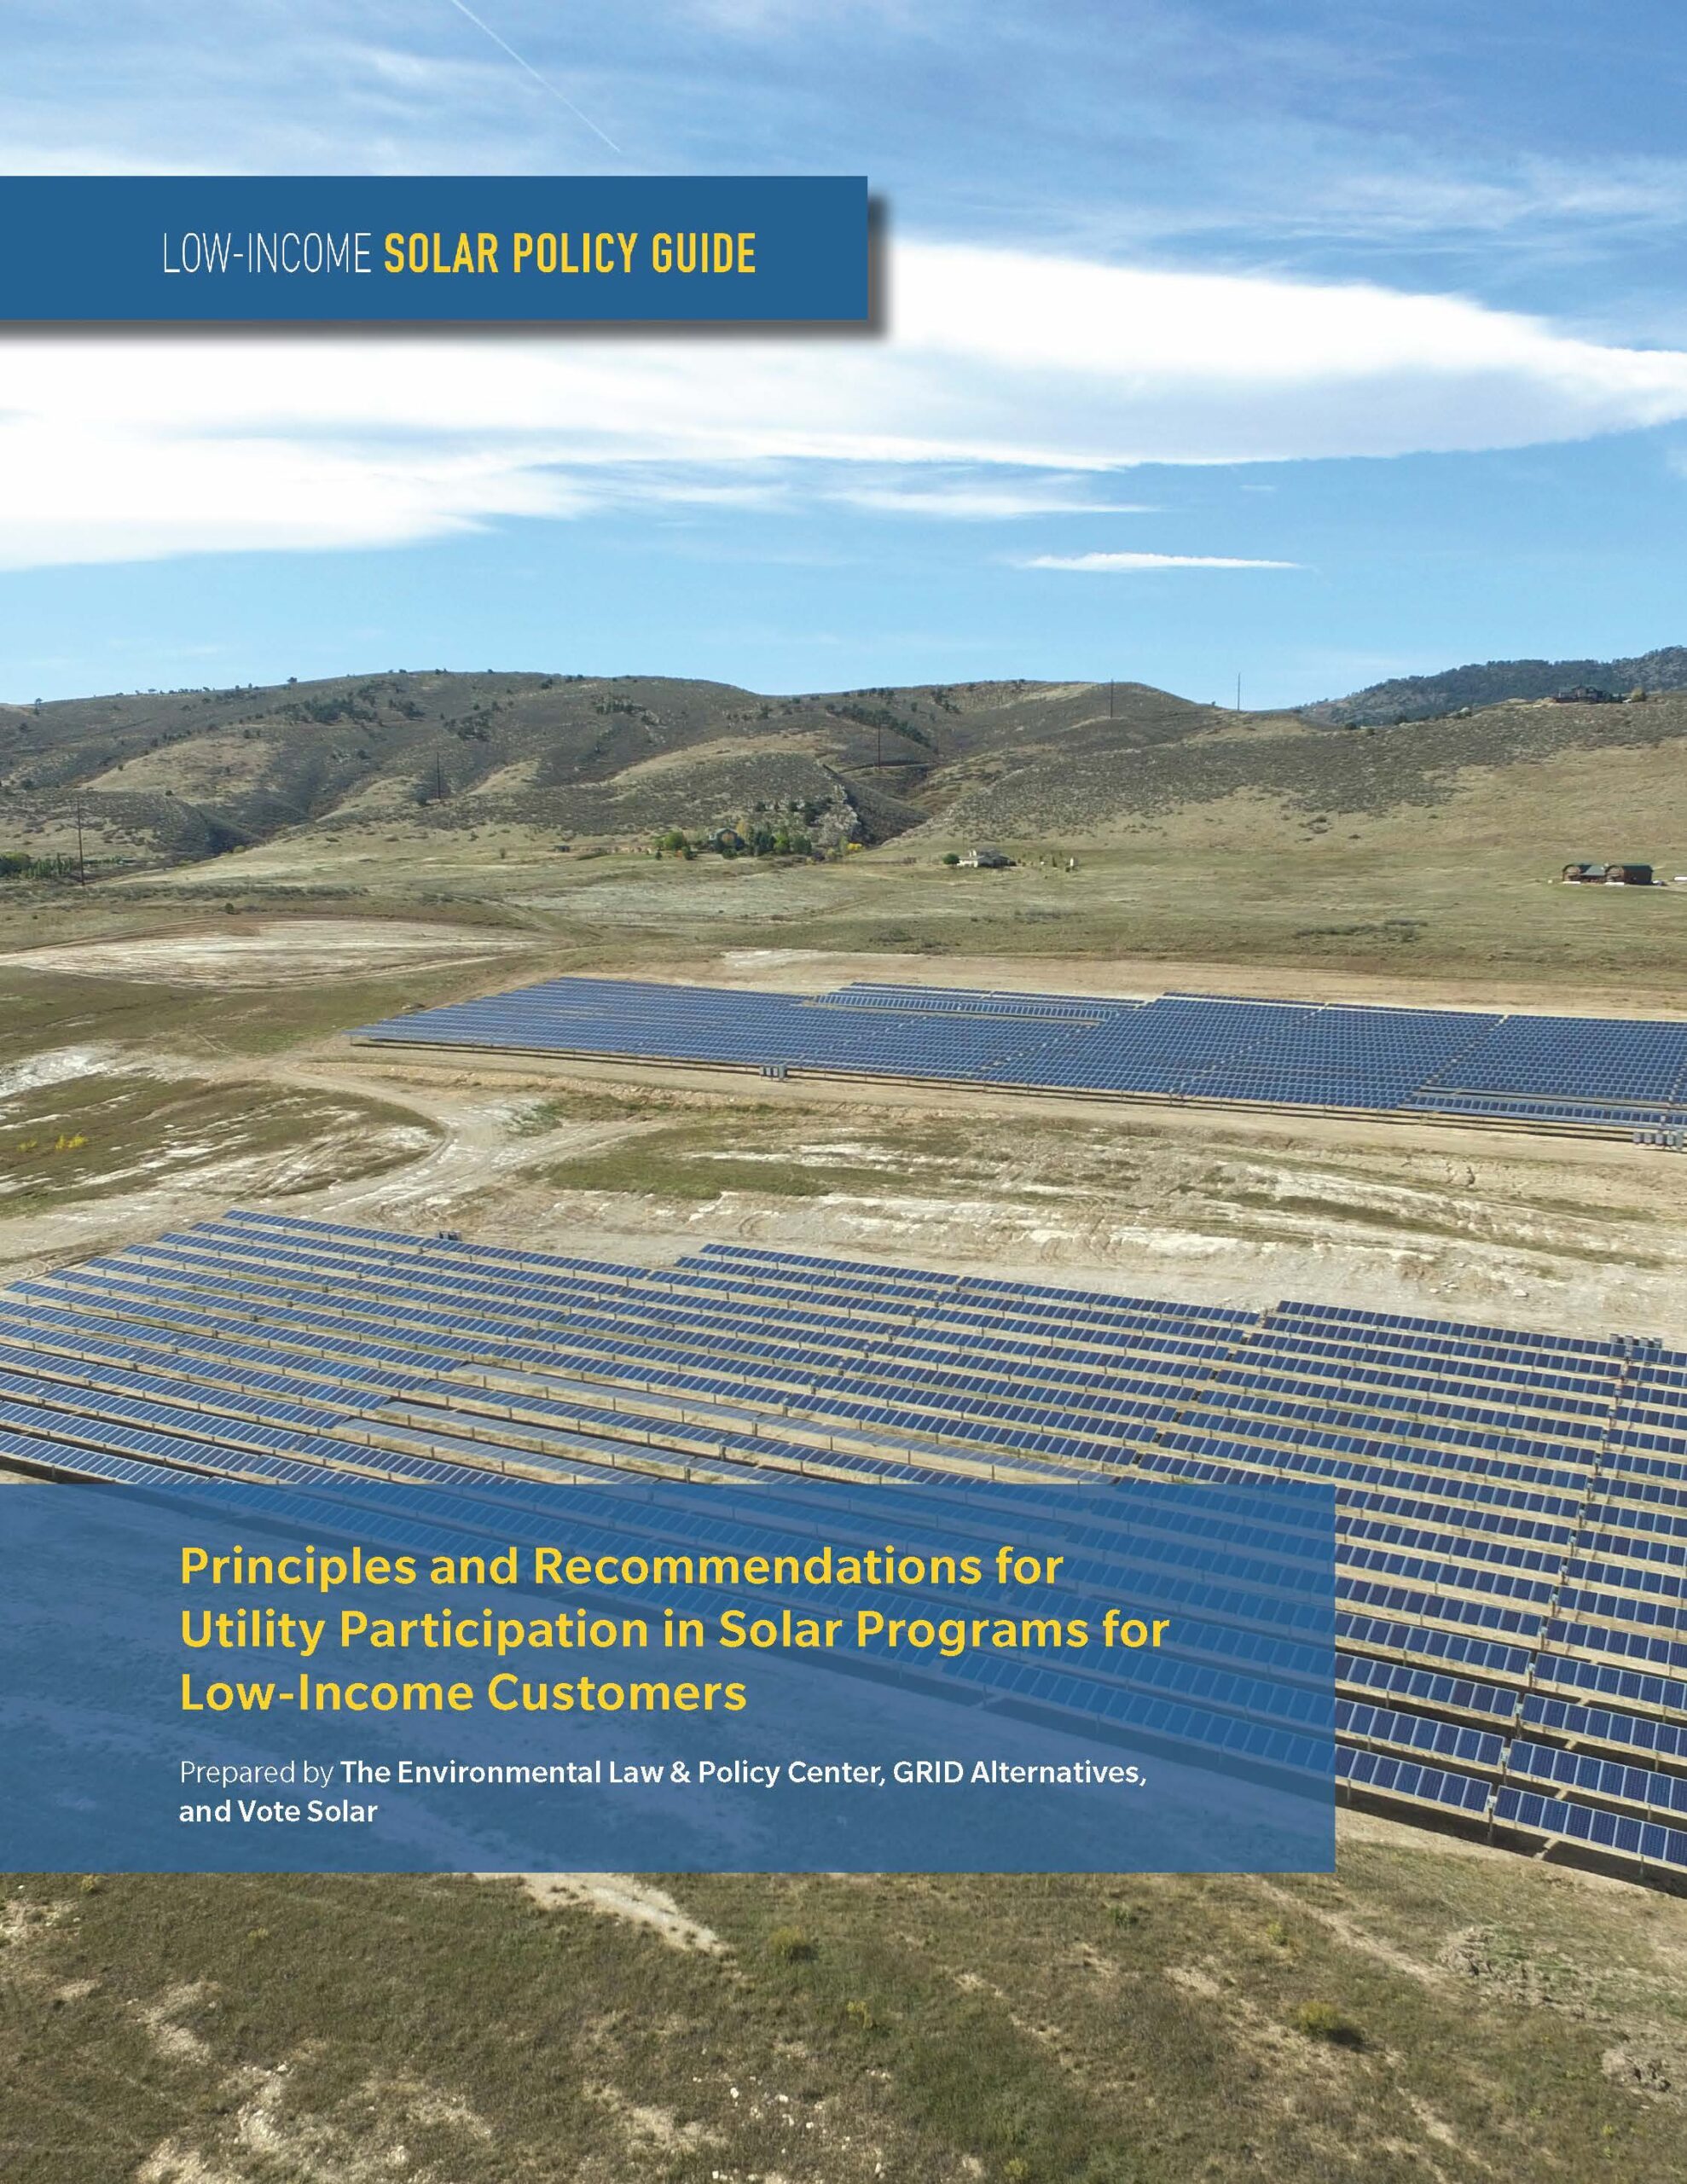 New Guide for Utility Participation in Solar Programs for Low-Income Customers